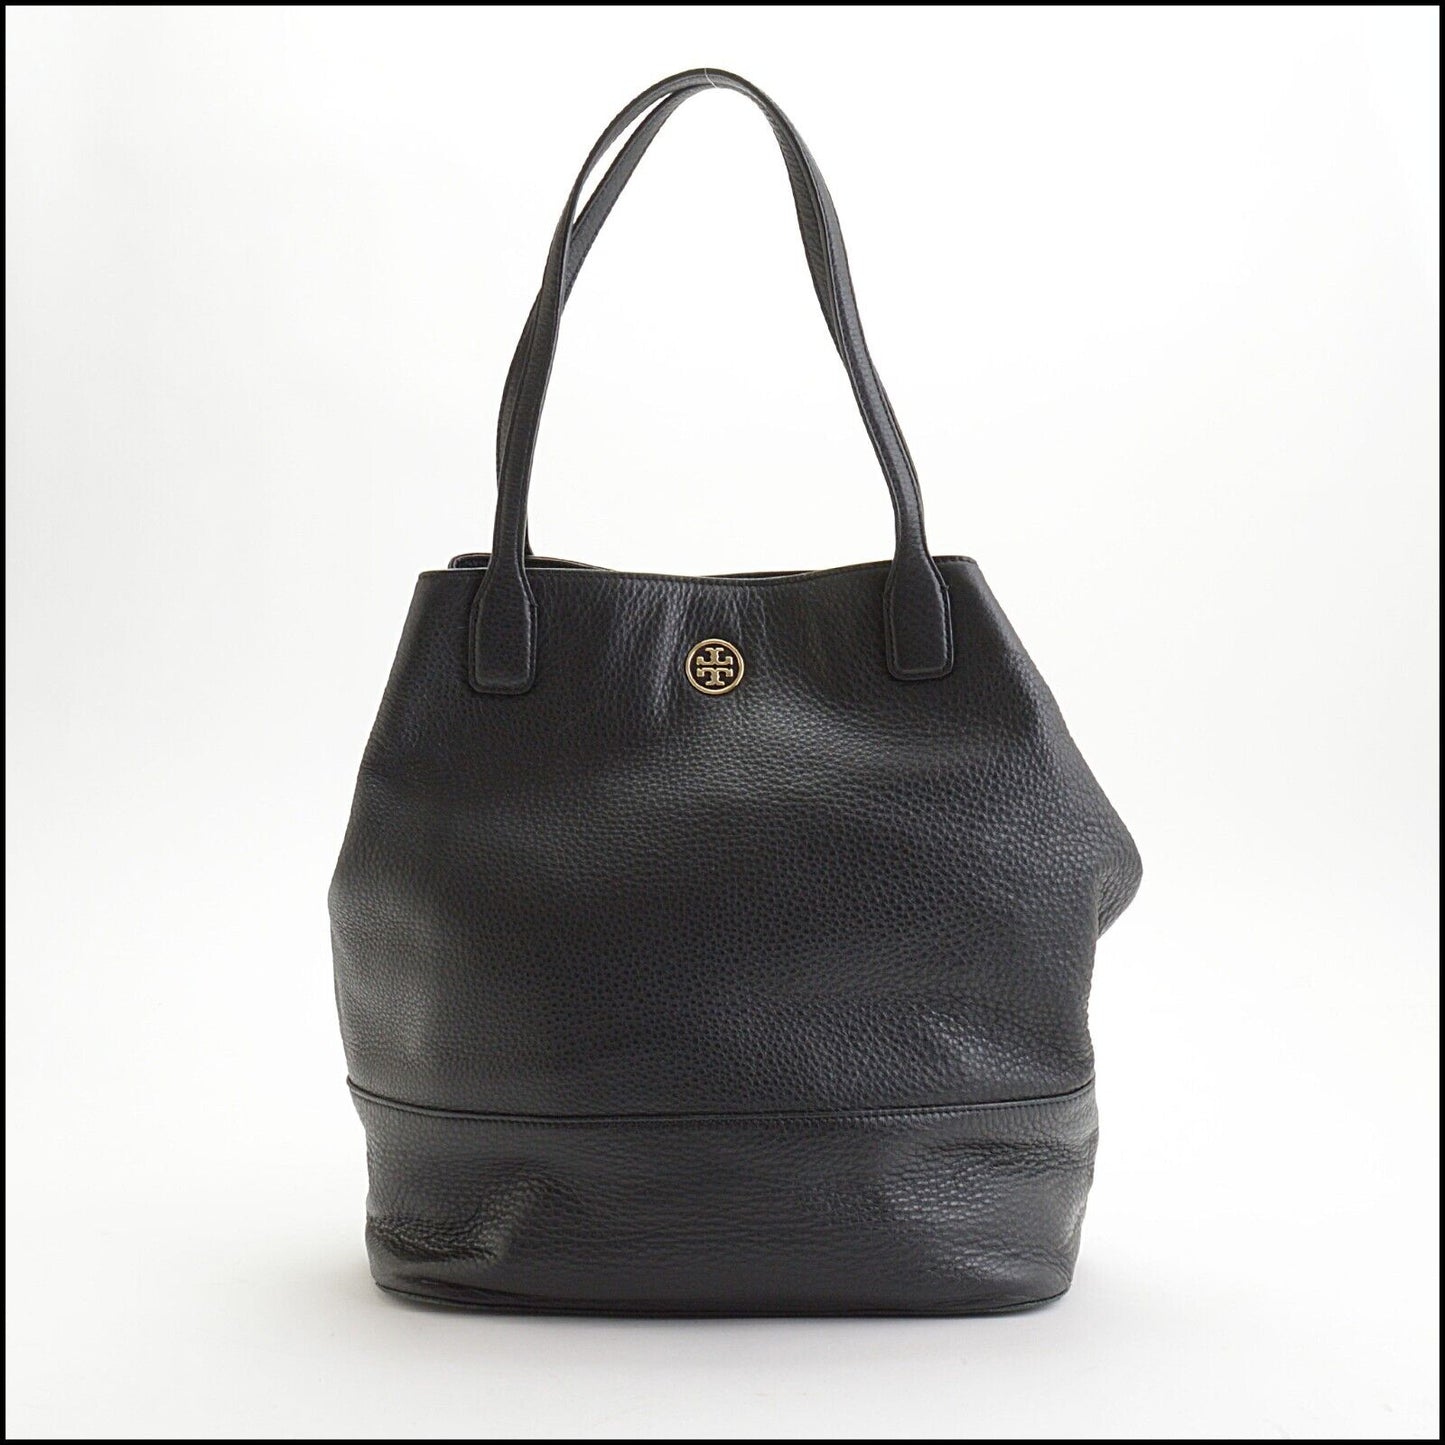 RDC13678 Authentic TORY BURCH Black Pebbled Leather Tall Tote Bag